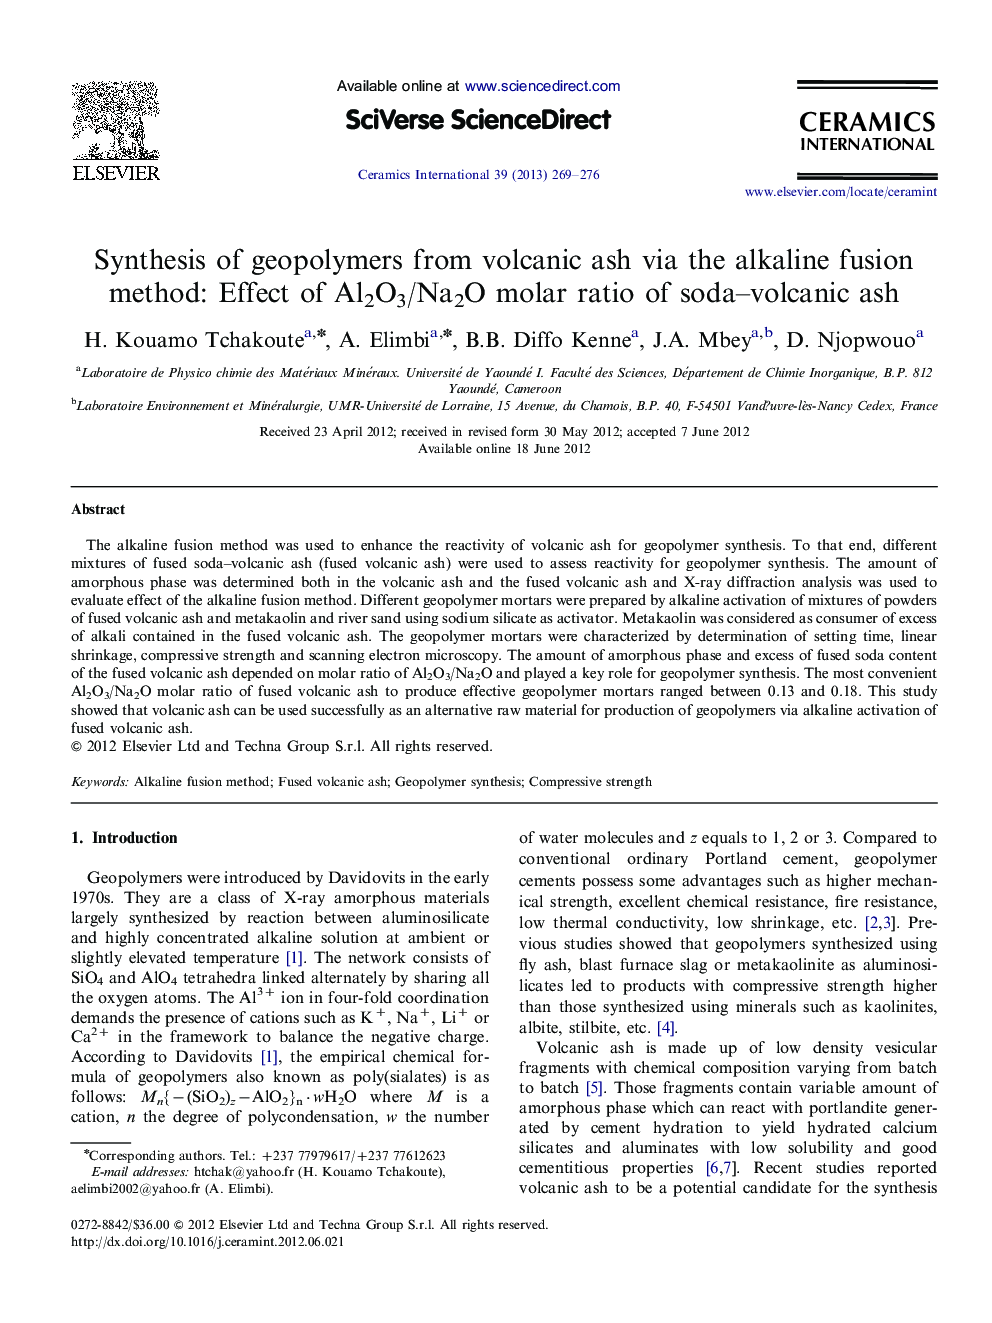 Synthesis of geopolymers from volcanic ash via the alkaline fusion method: Effect of Al2O3/Na2O molar ratio of soda–volcanic ash